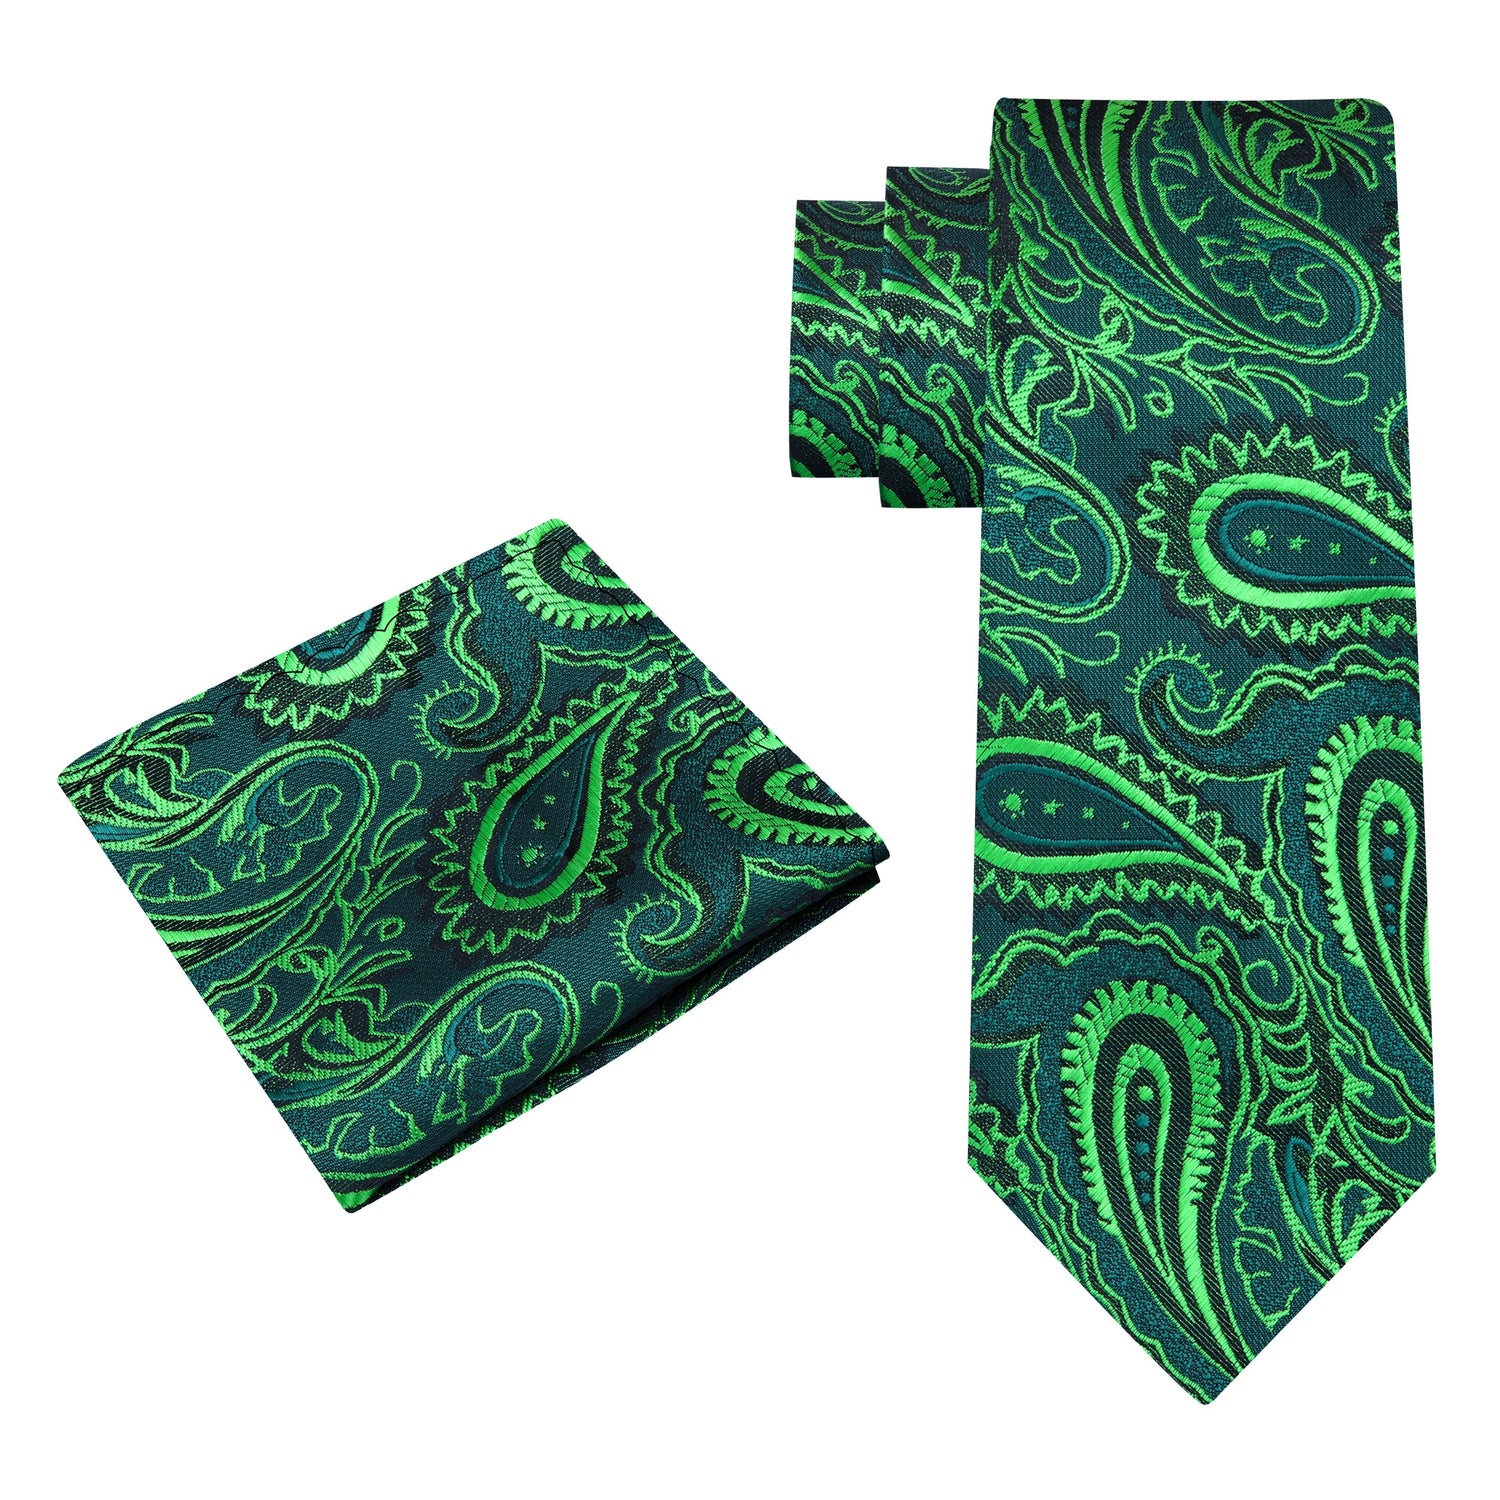 Alt View: Green Paisley Canopy Tie and Pocket Square